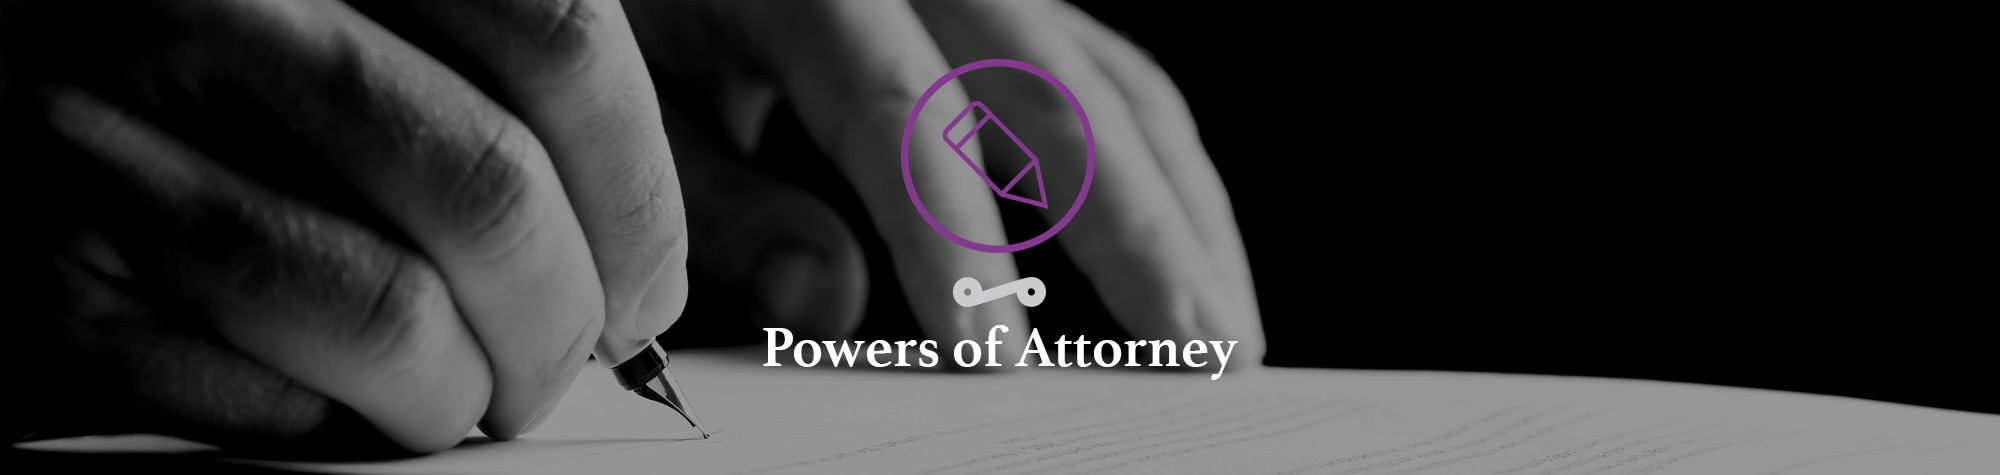 Lasting and enduring powers of attorney forms